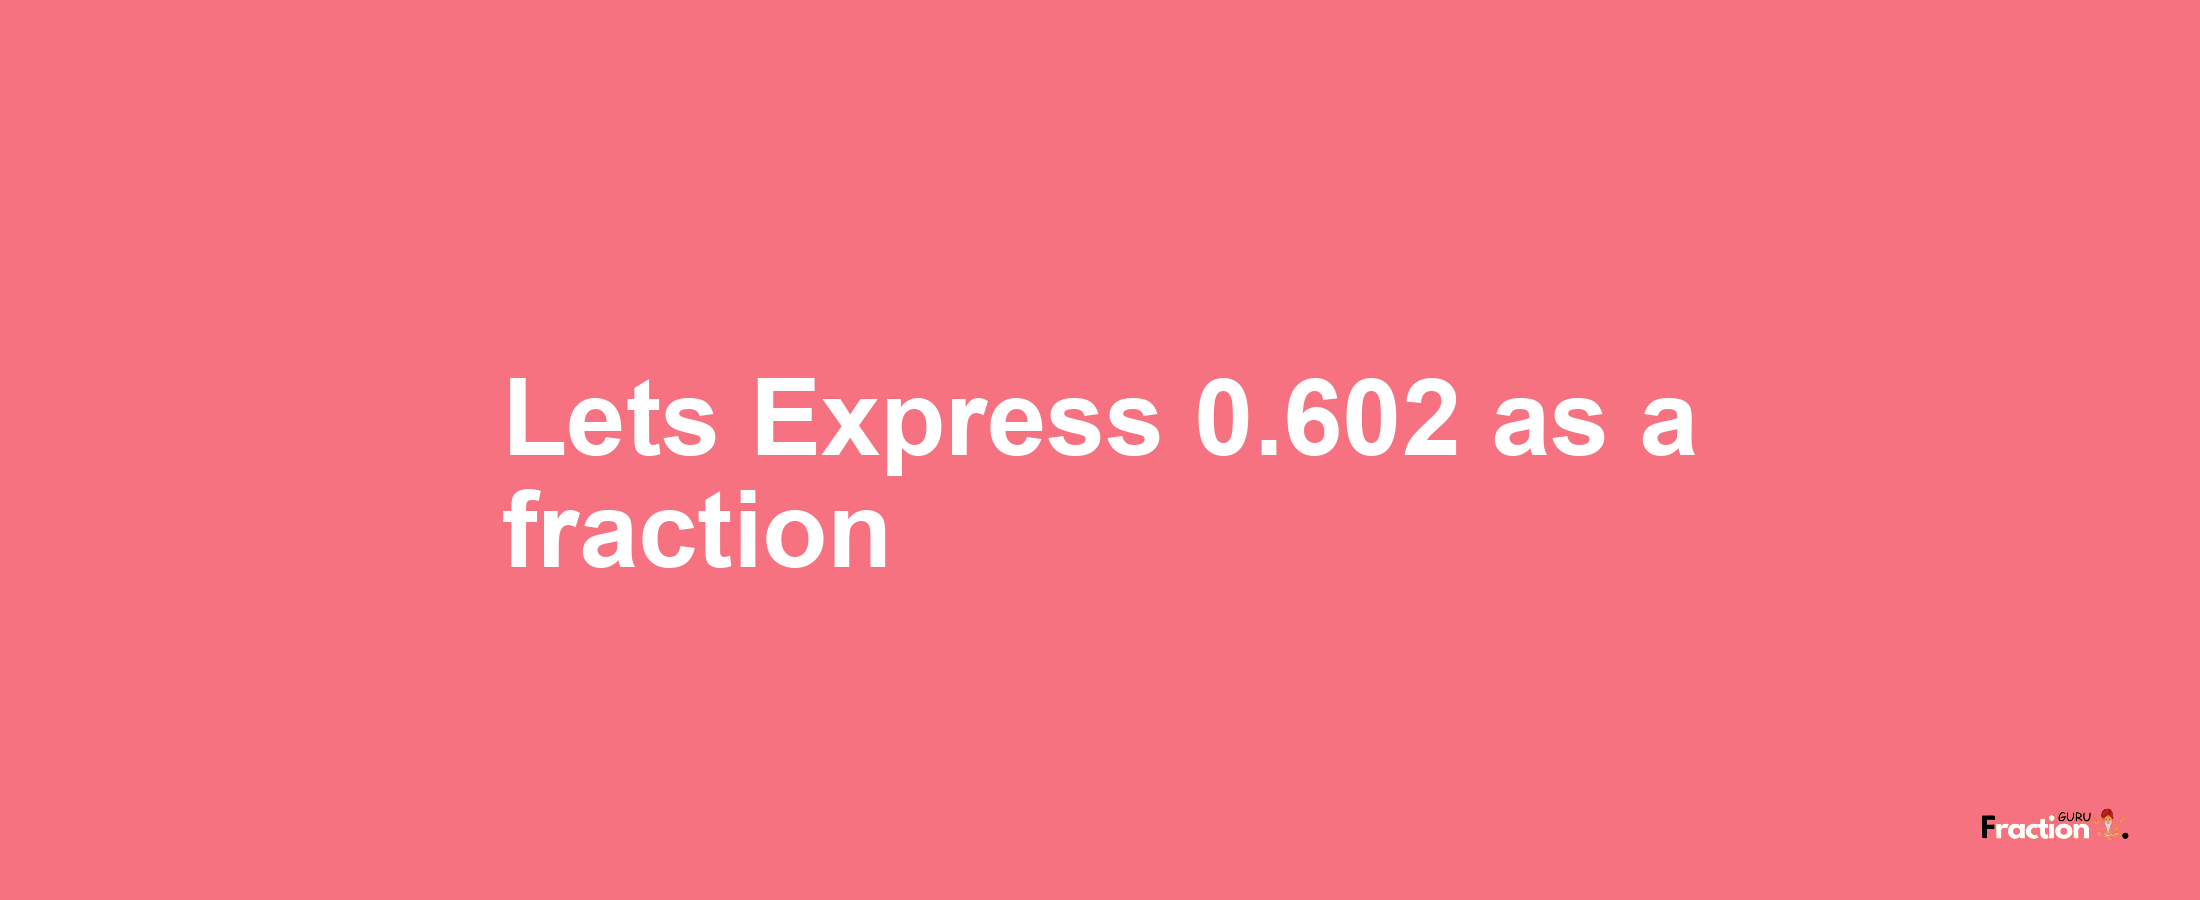 Lets Express 0.602 as afraction